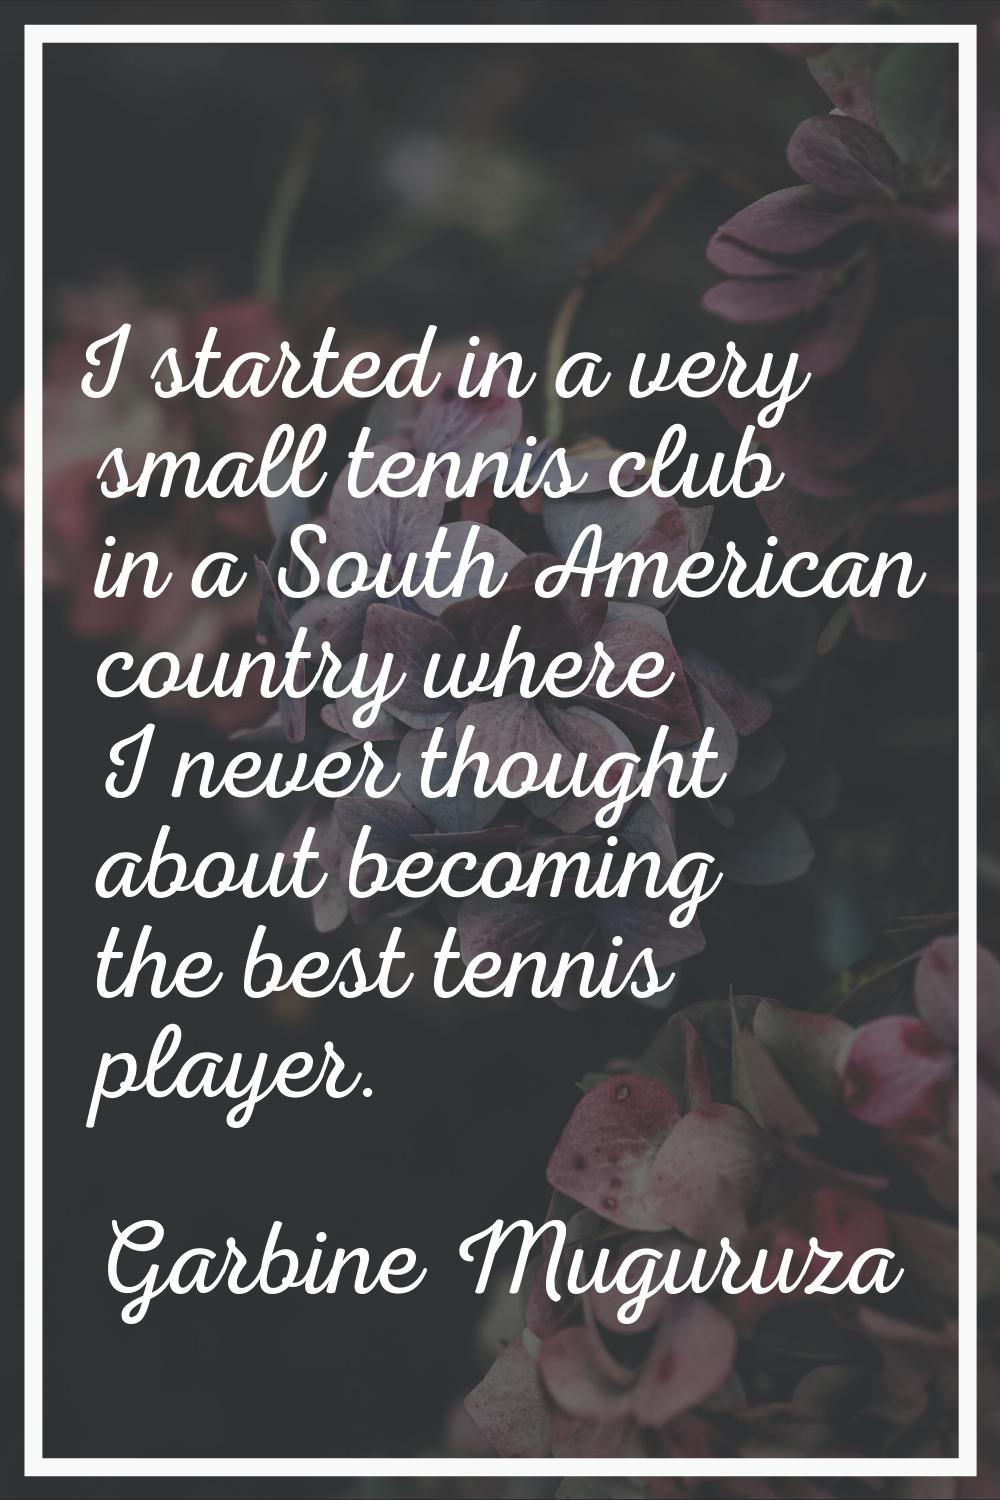 I started in a very small tennis club in a South American country where I never thought about becom